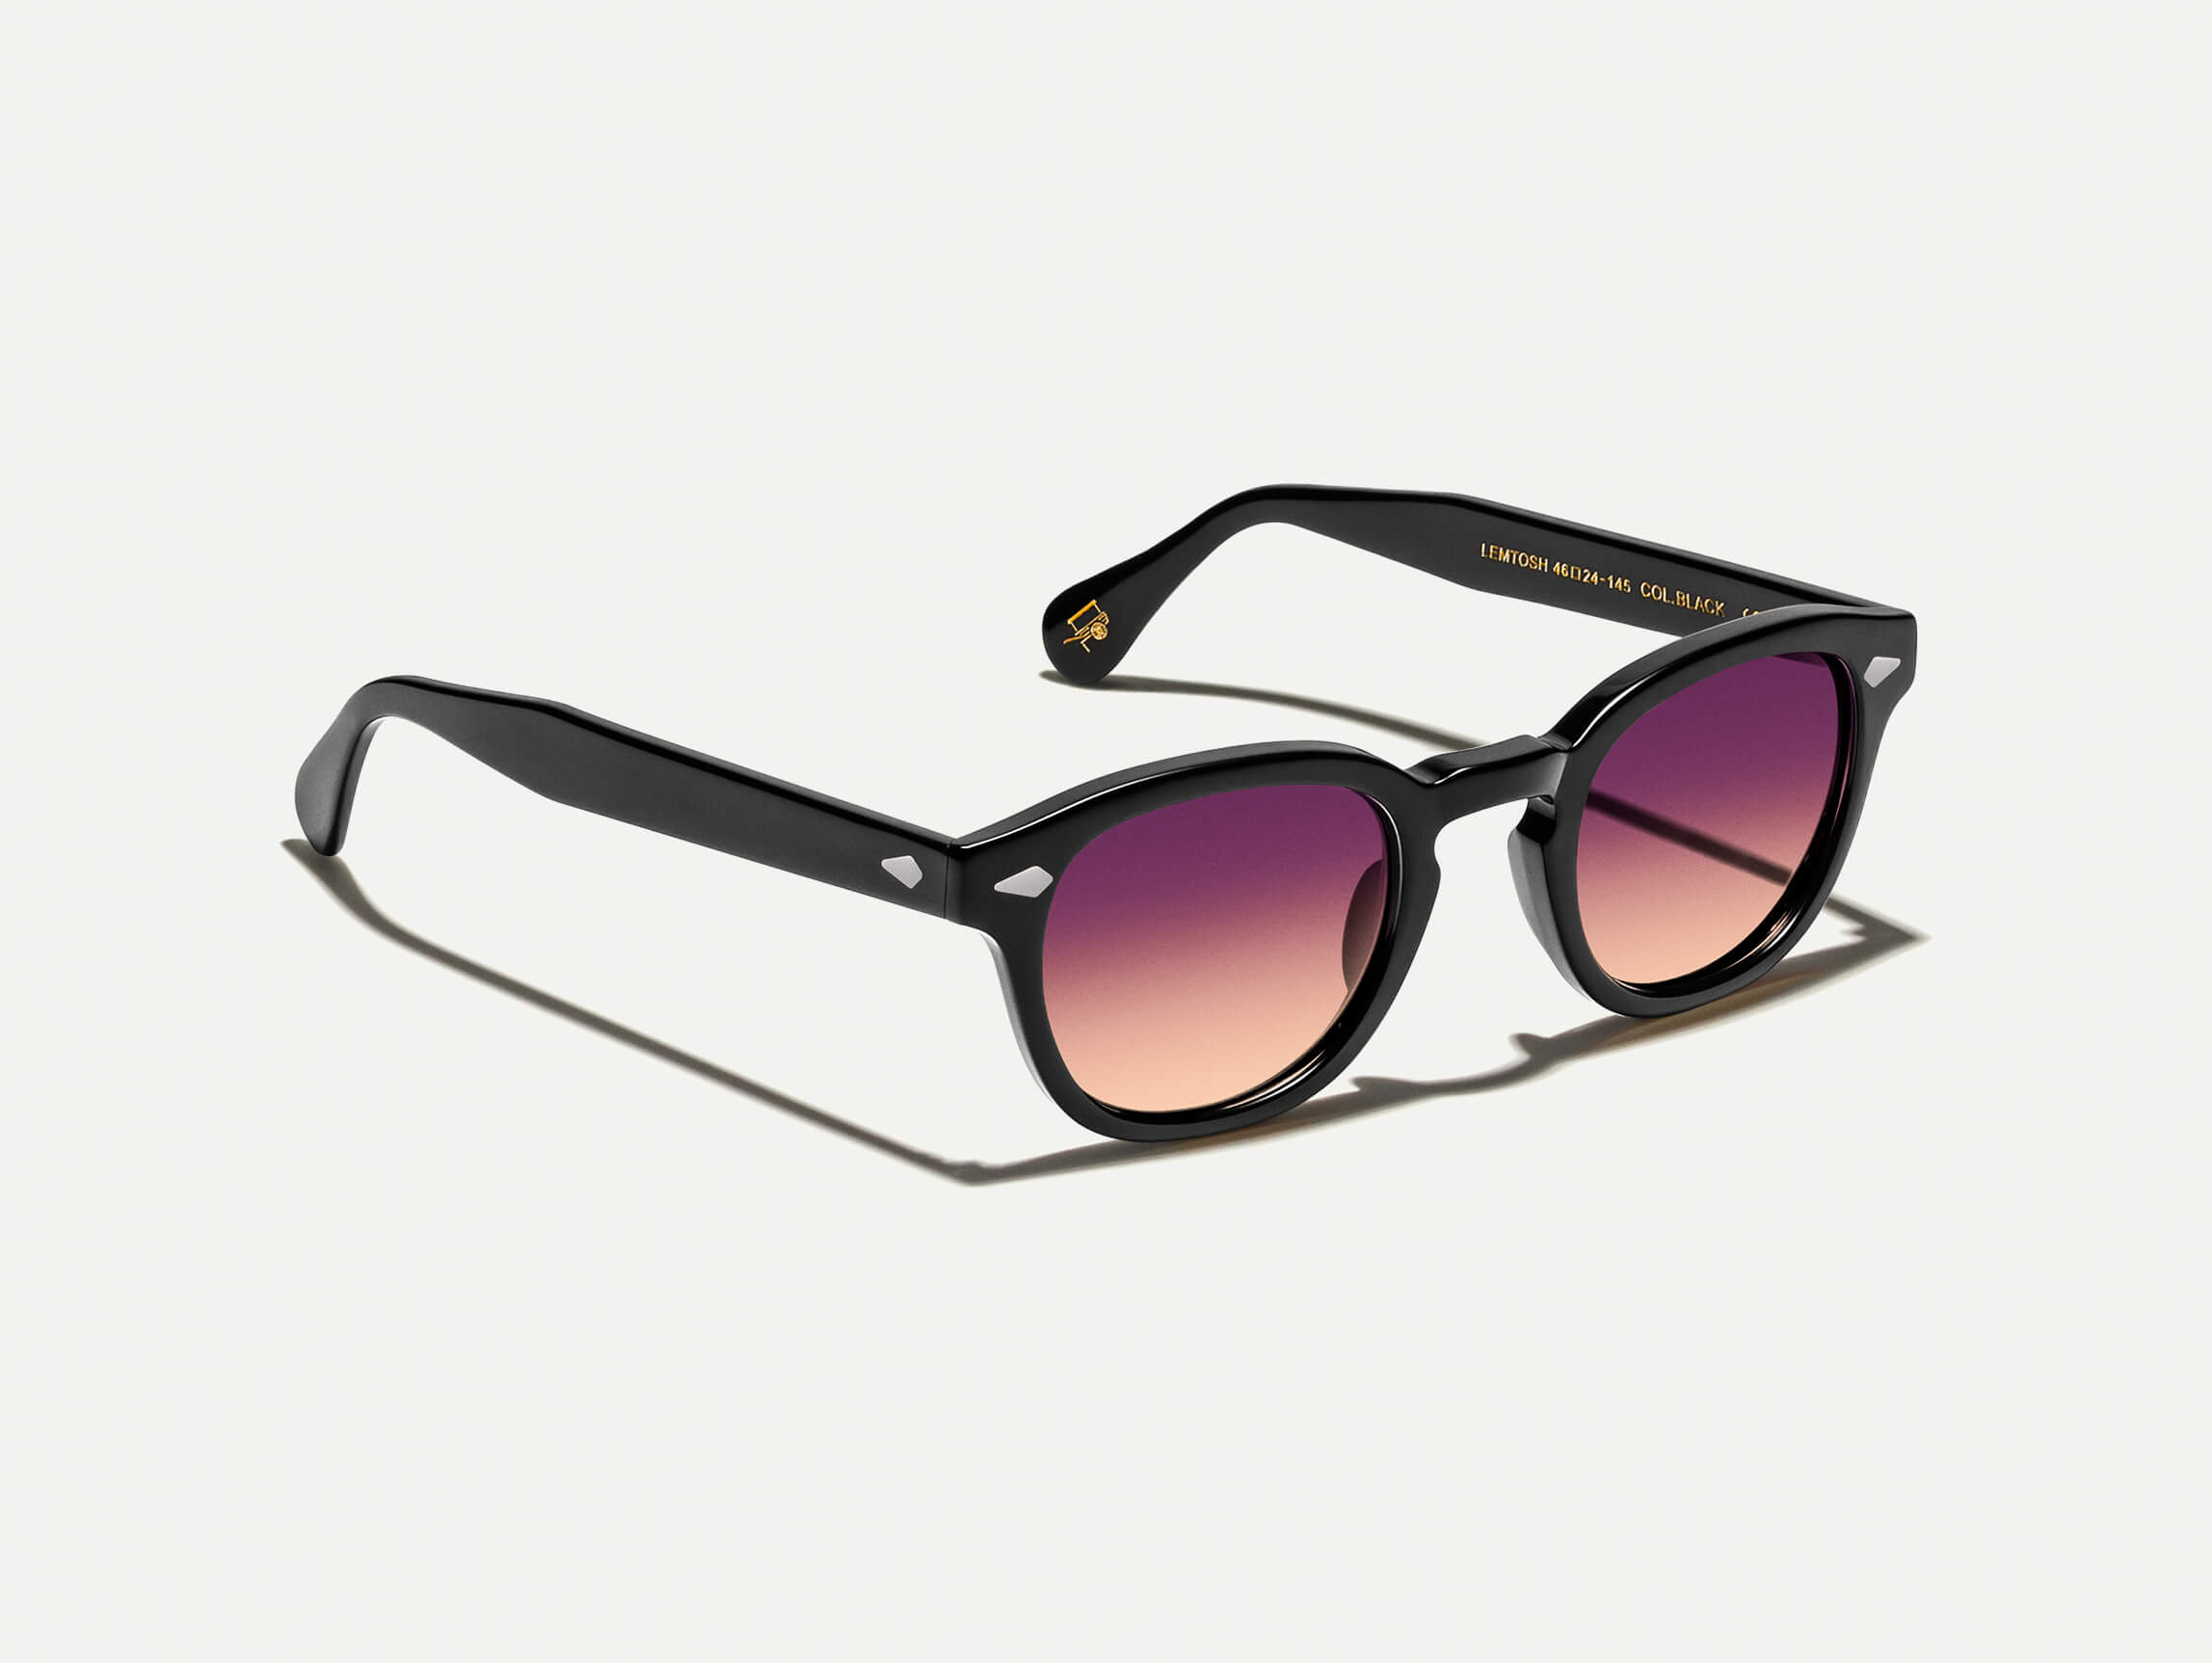 The LEMTOSH Black with City Lights Tinted Lenses